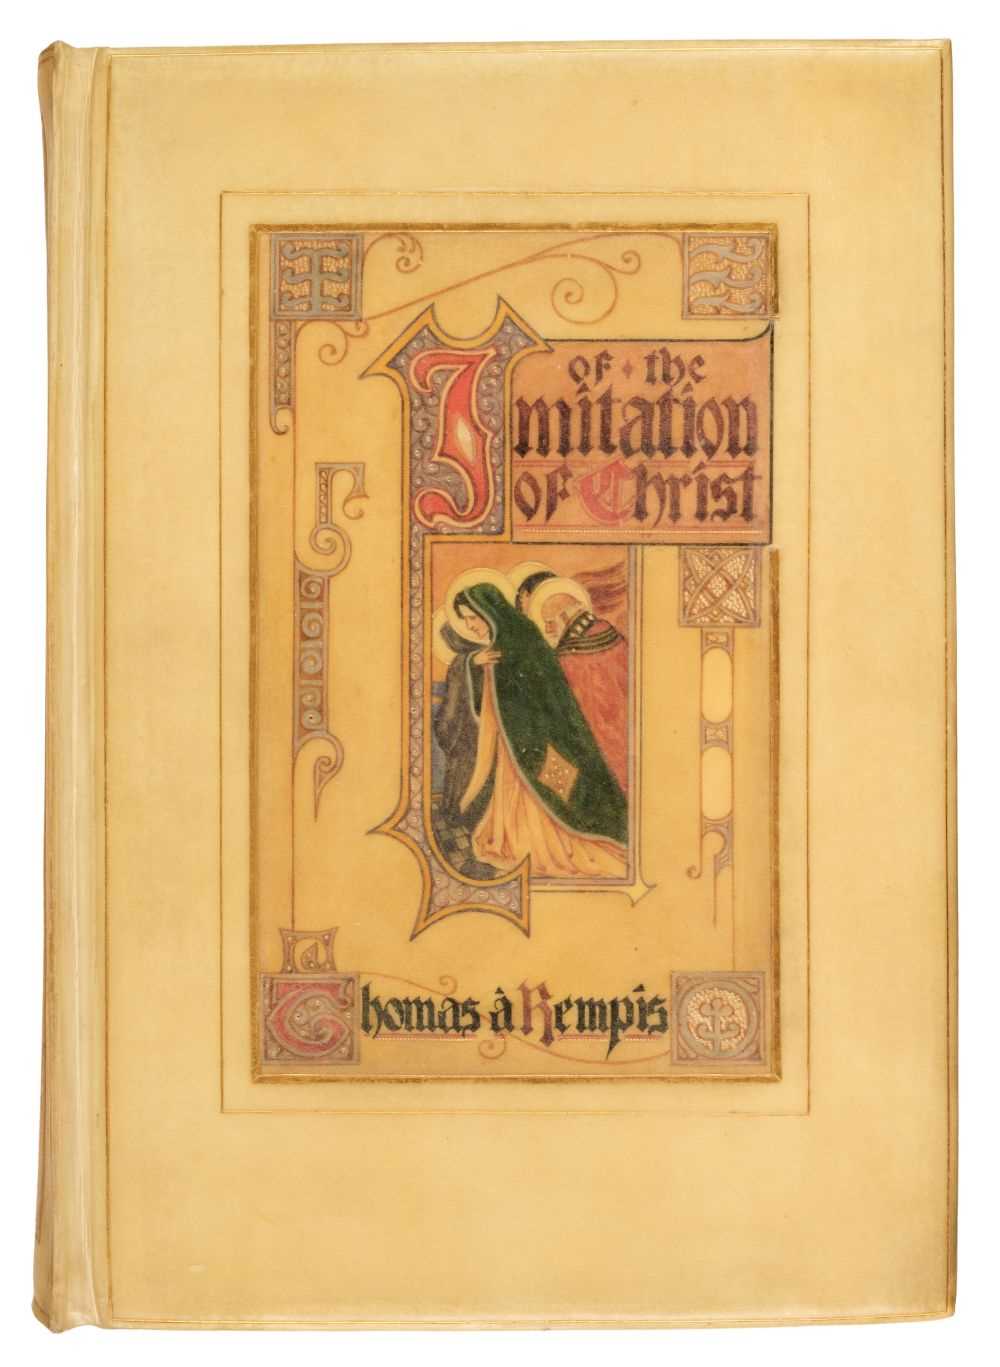 Lot 588 - Chivers (Cedric). Of the Imitation of Christ by Thomas a Kempis, 1908